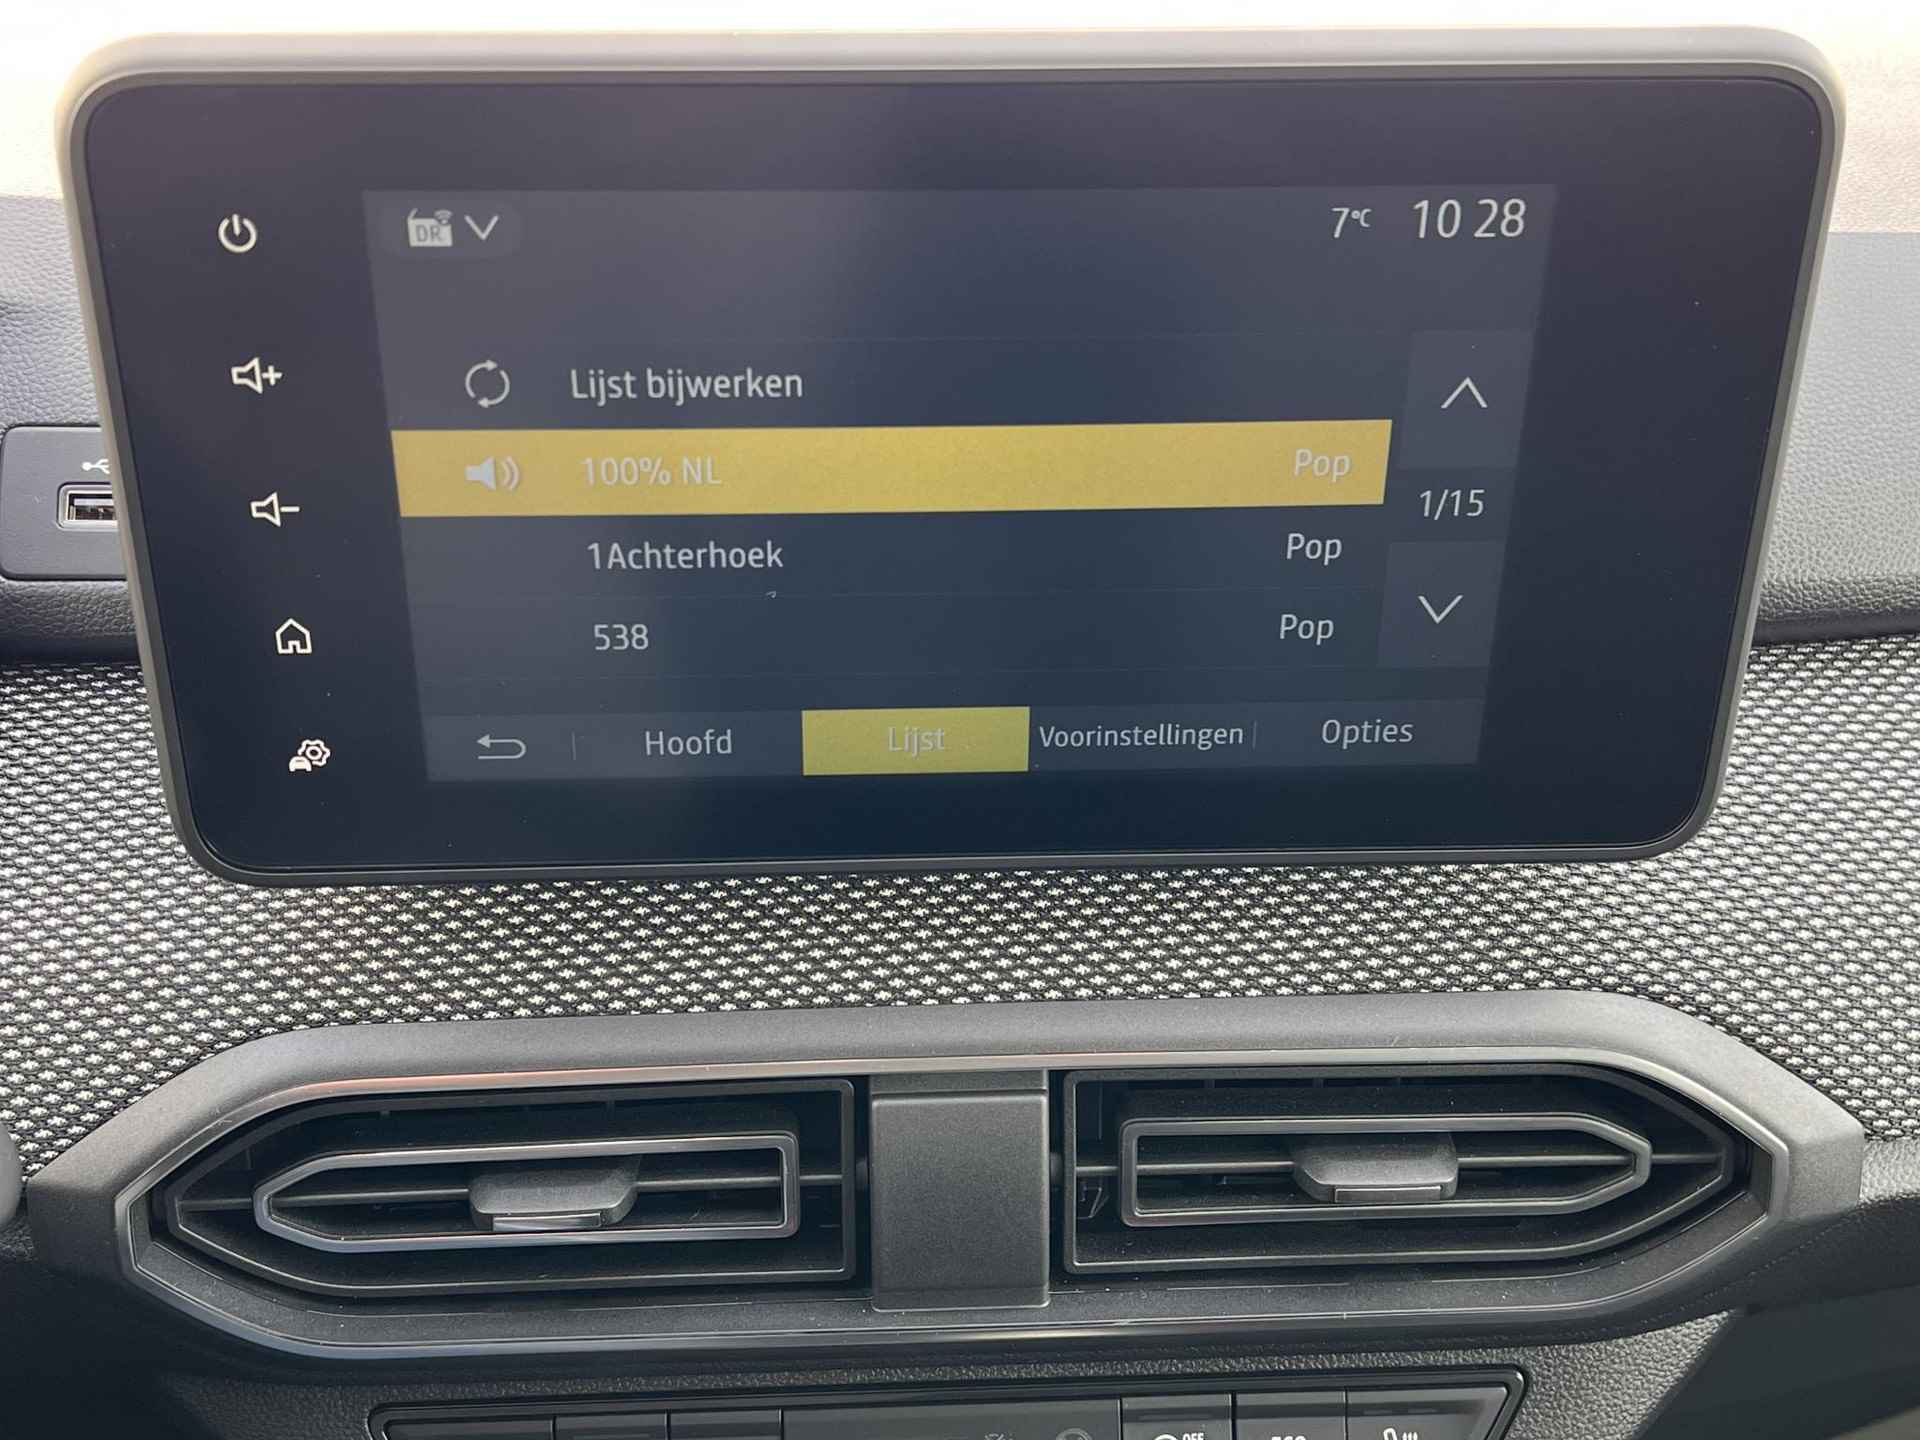 Dacia Jogger 1.0 TCe 110 Extreme 7p. / Zeven persoons / Navigatie via Apple Carplay of Android Auto / Stoelverwarming / - 18/49